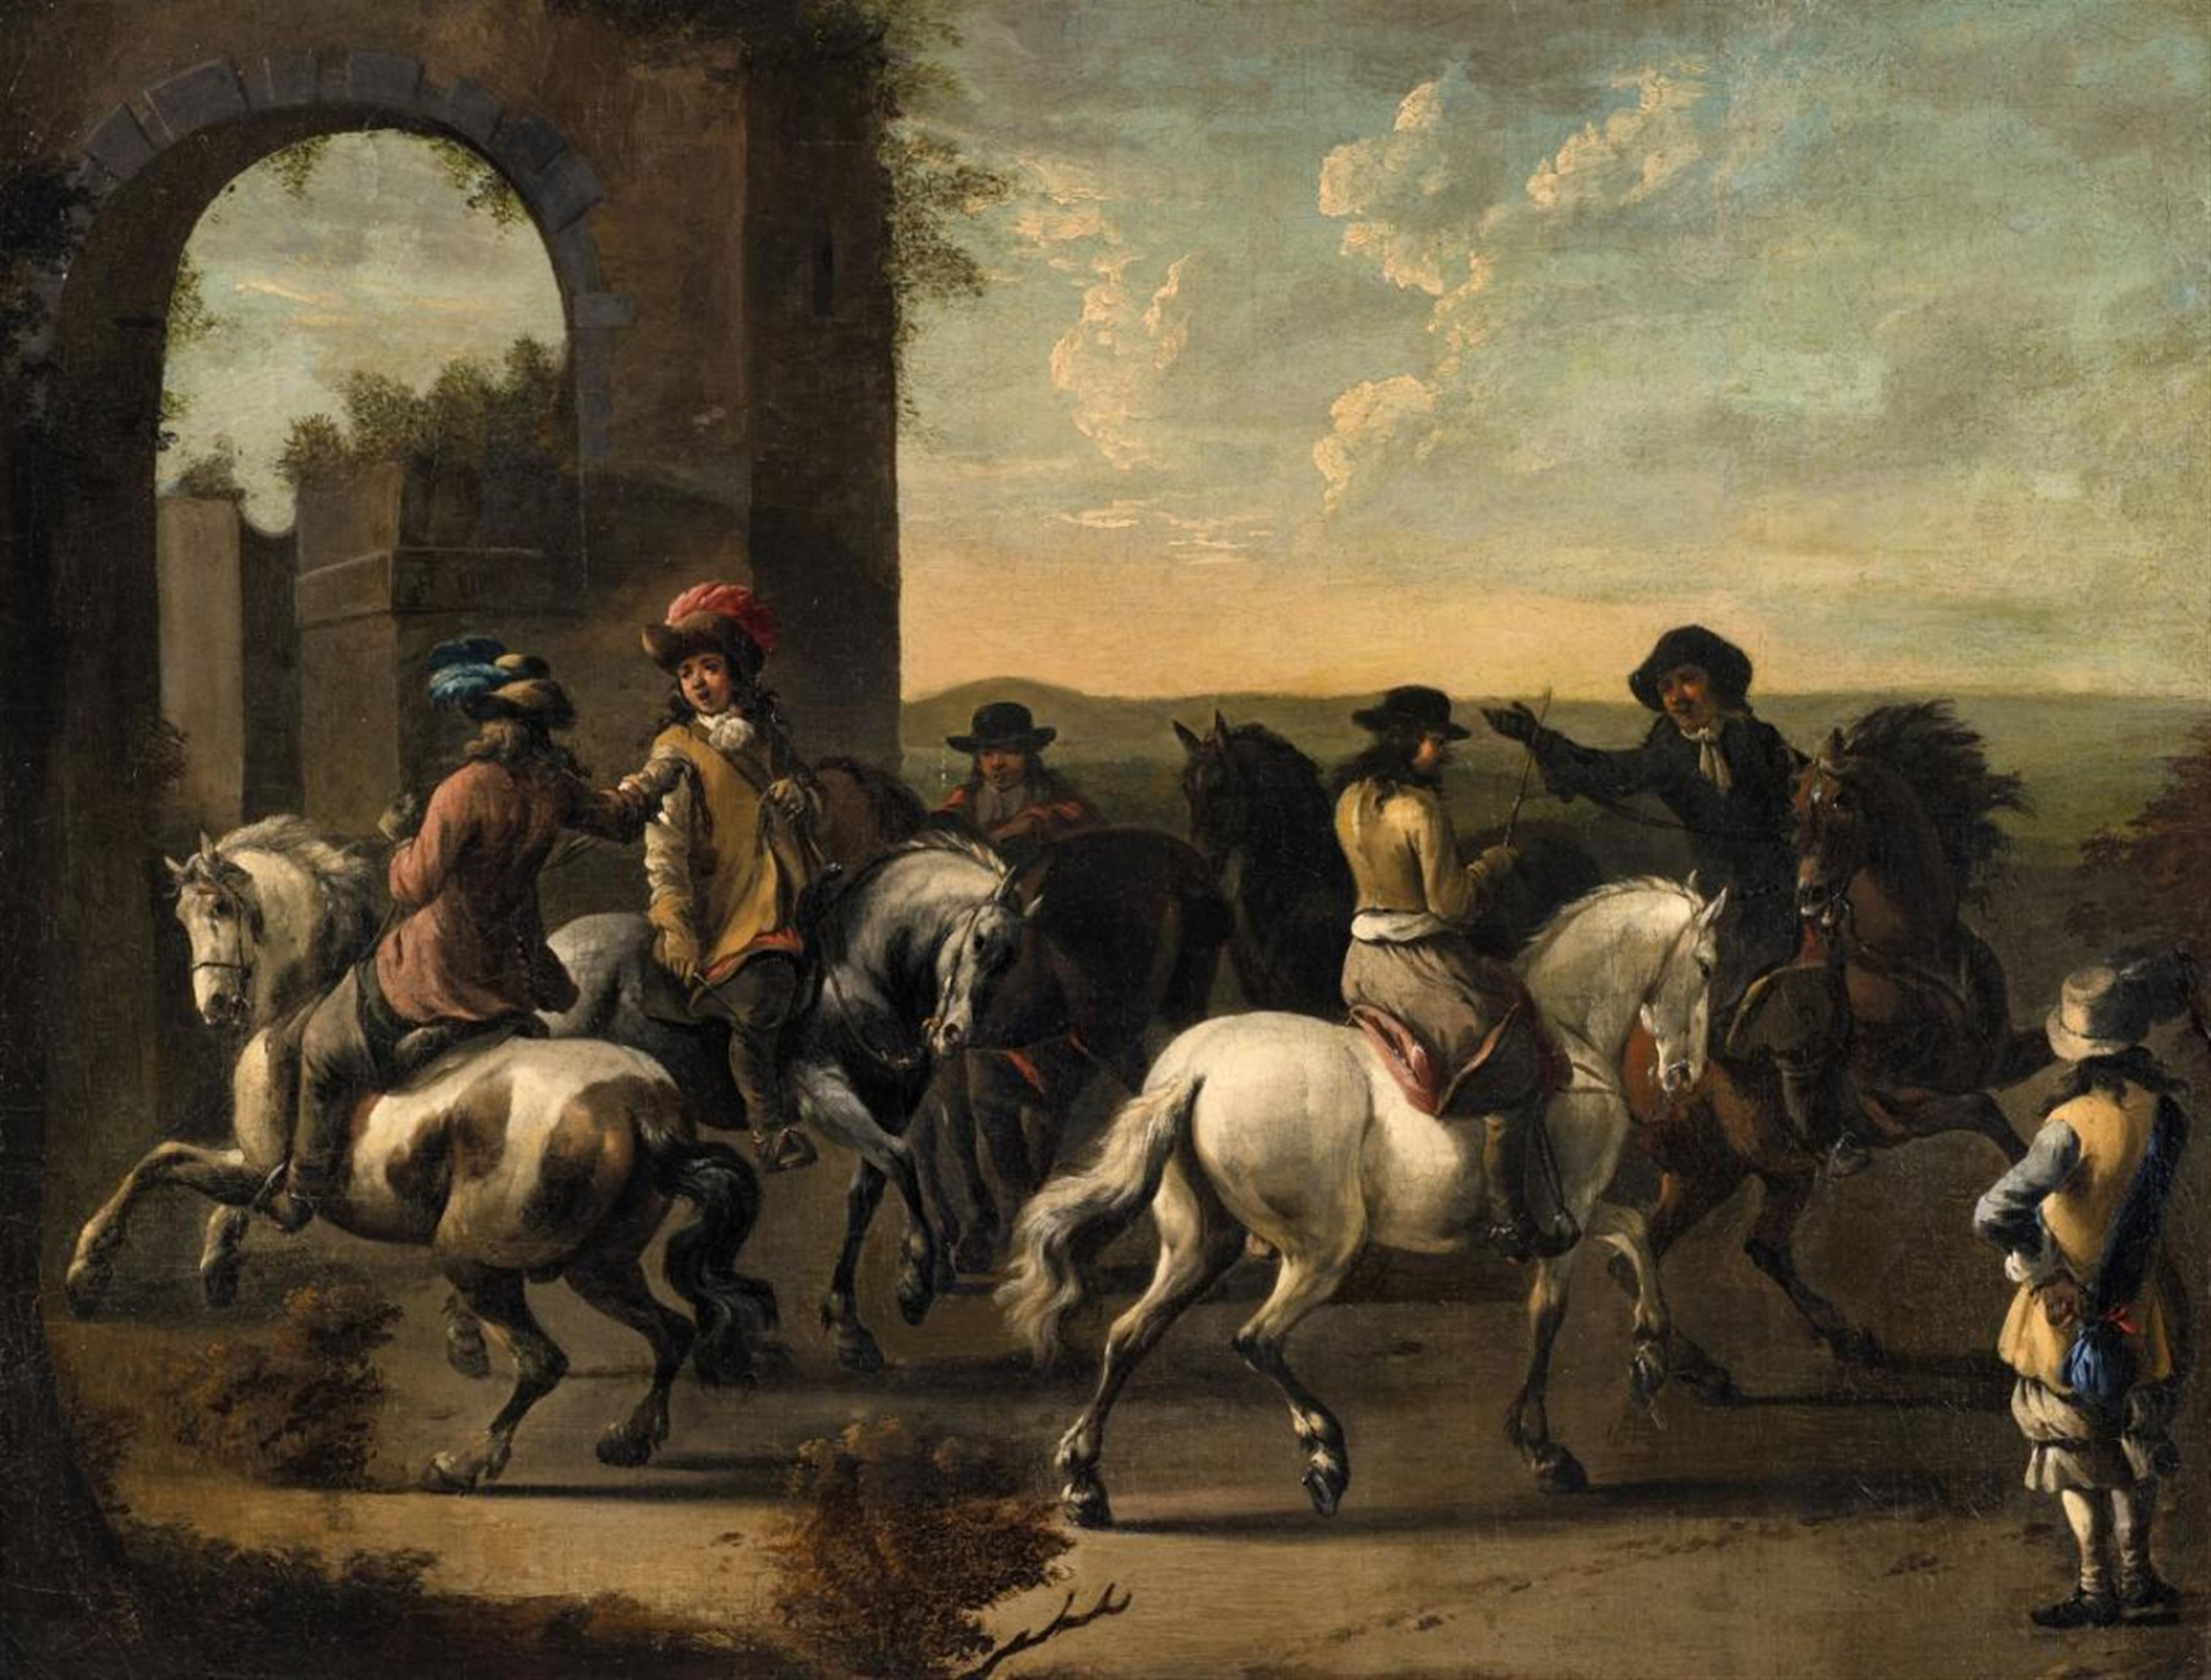 Pieter van Bloemen, attributed to - Southern Landscape with Riders - image-1